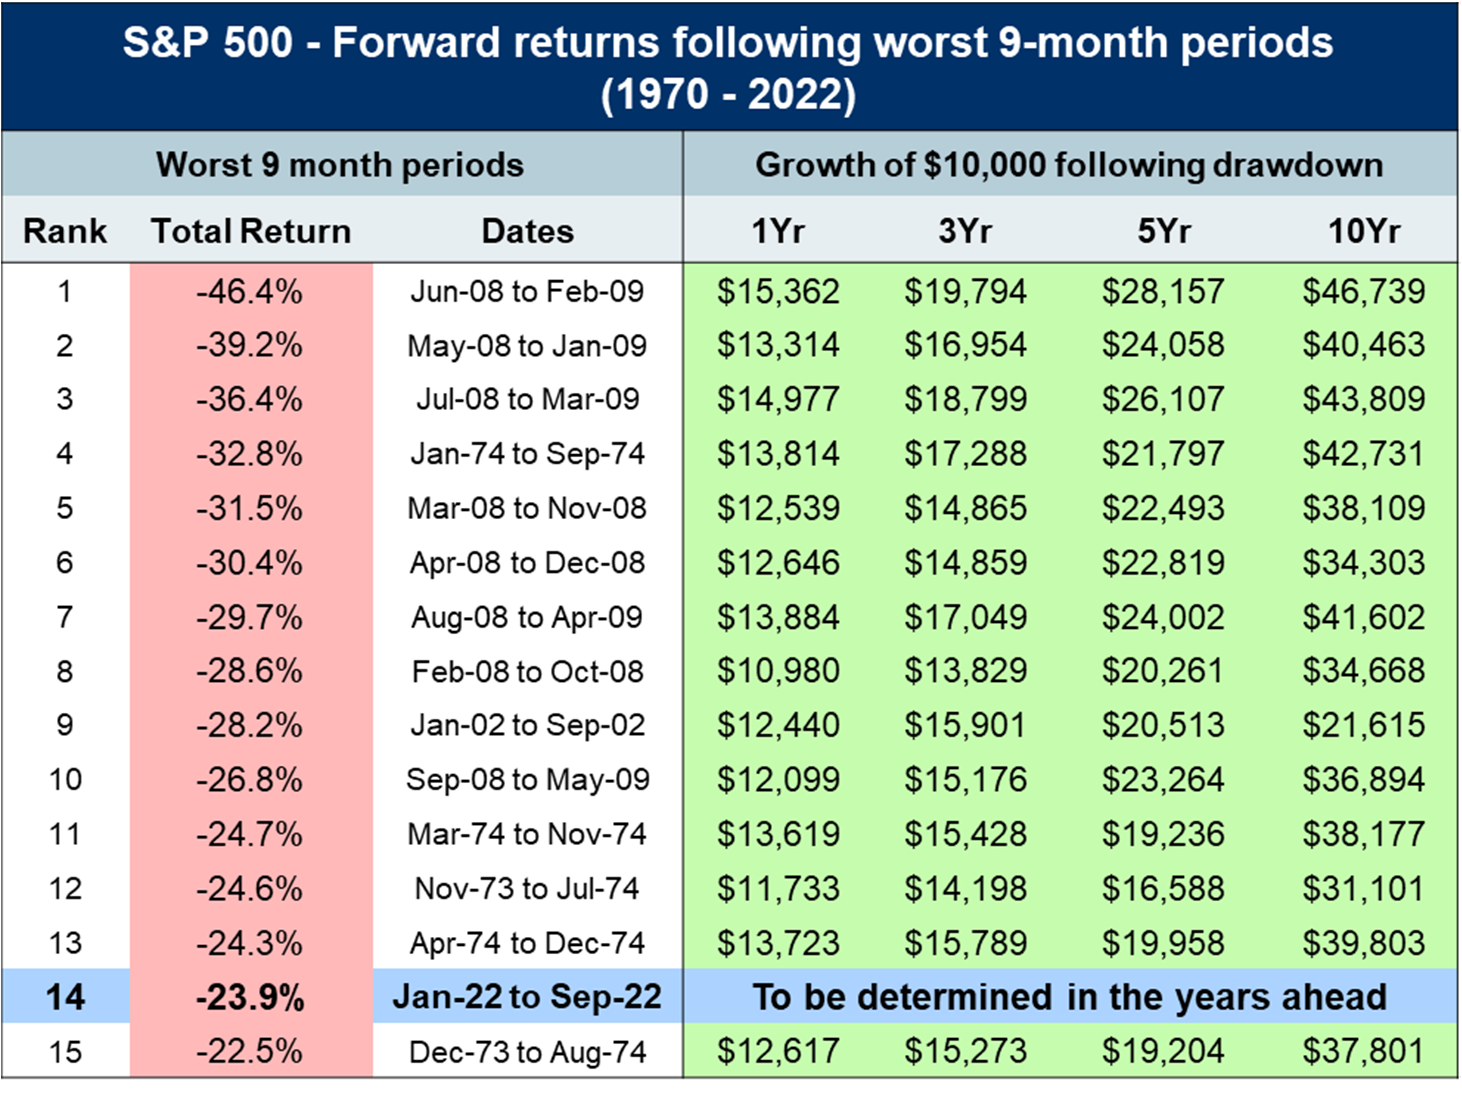 A chart showing S & P Forward returns following the worst 9-month periods on record.